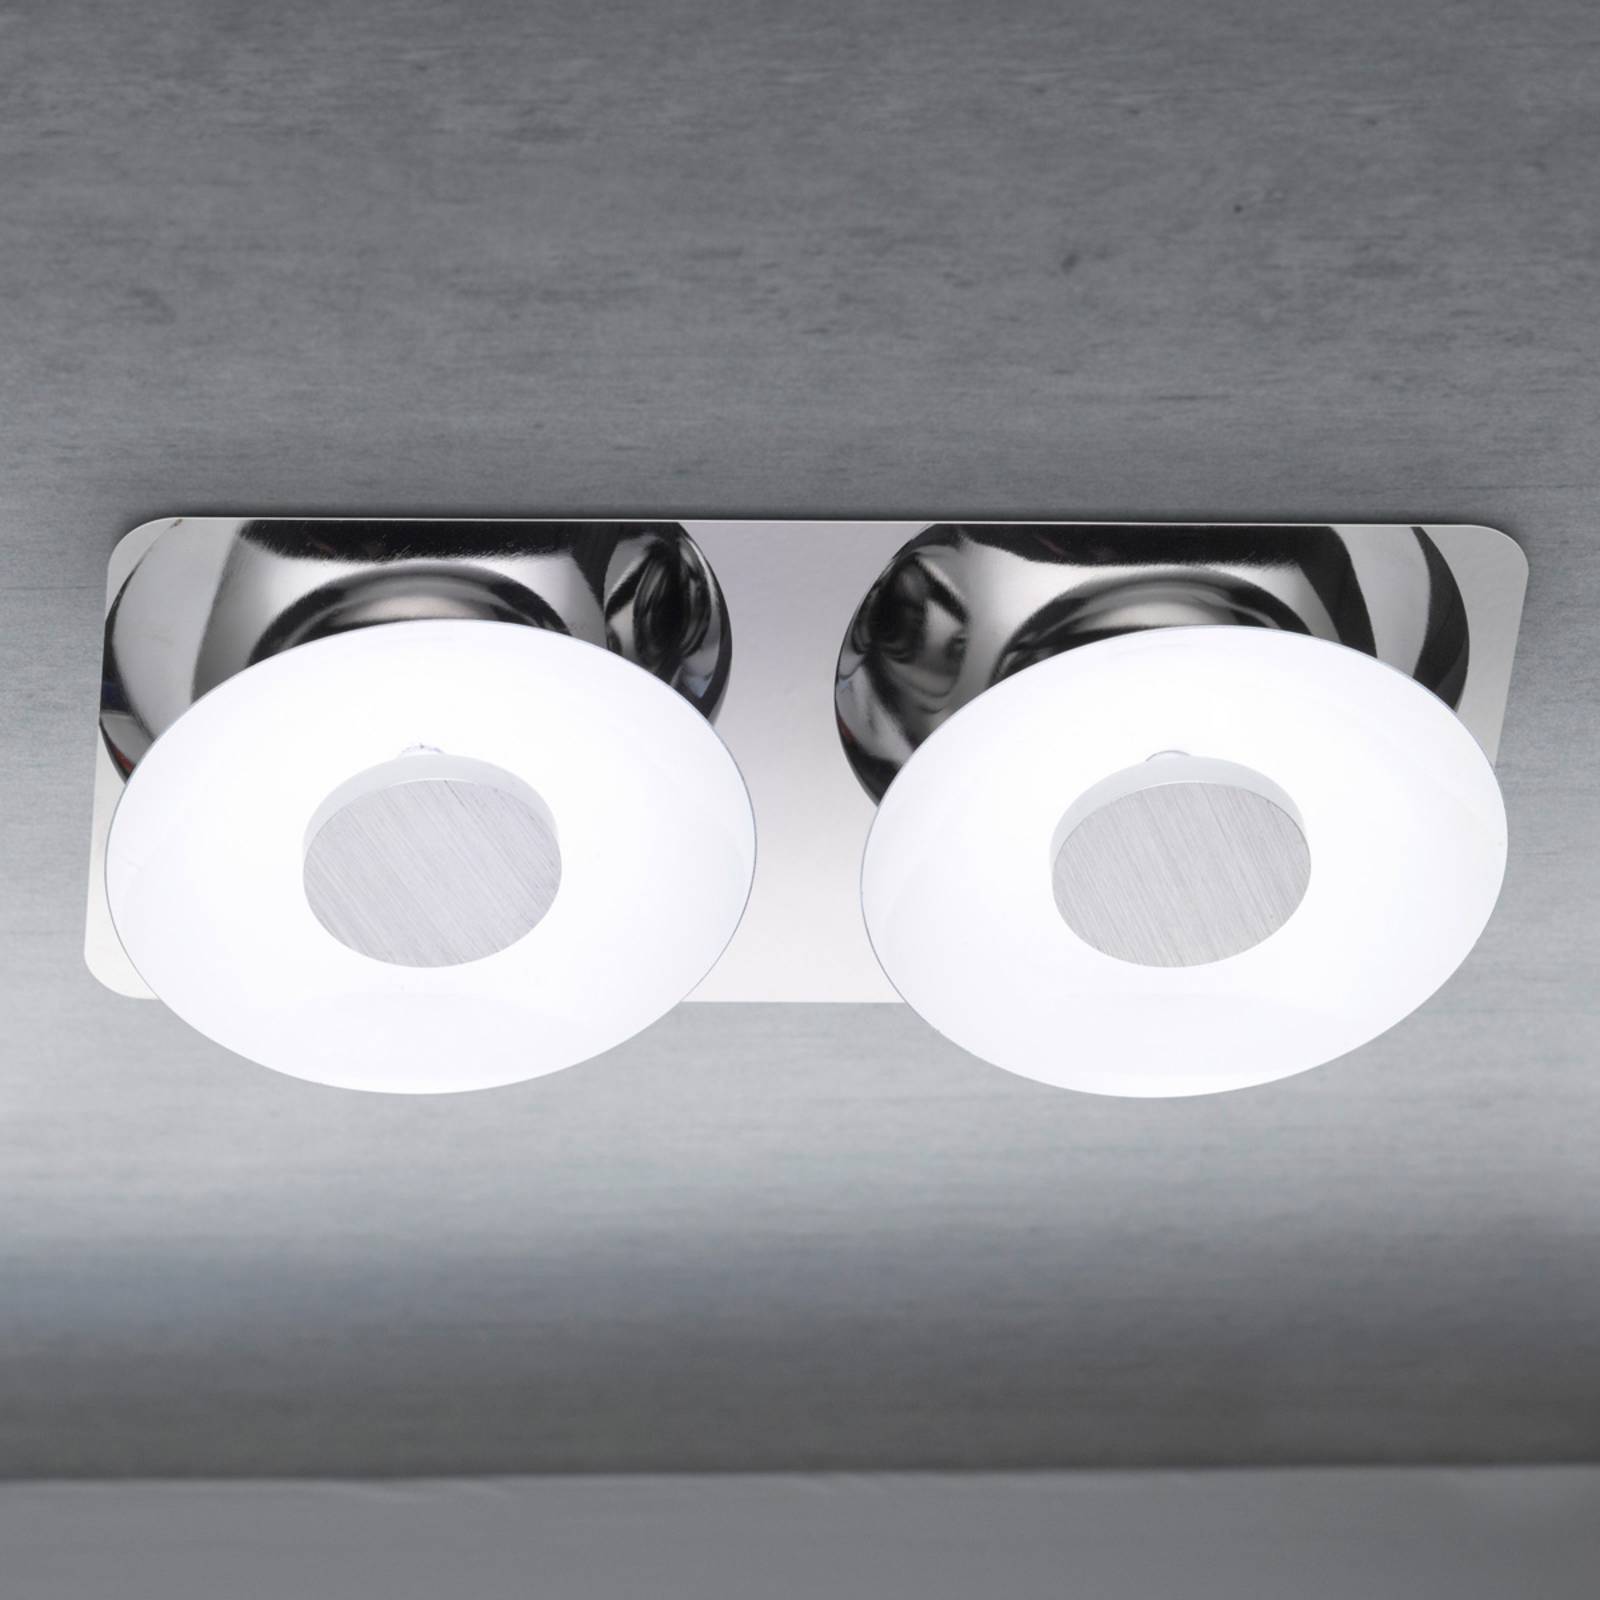 Space LED ceiling light, two-bulb